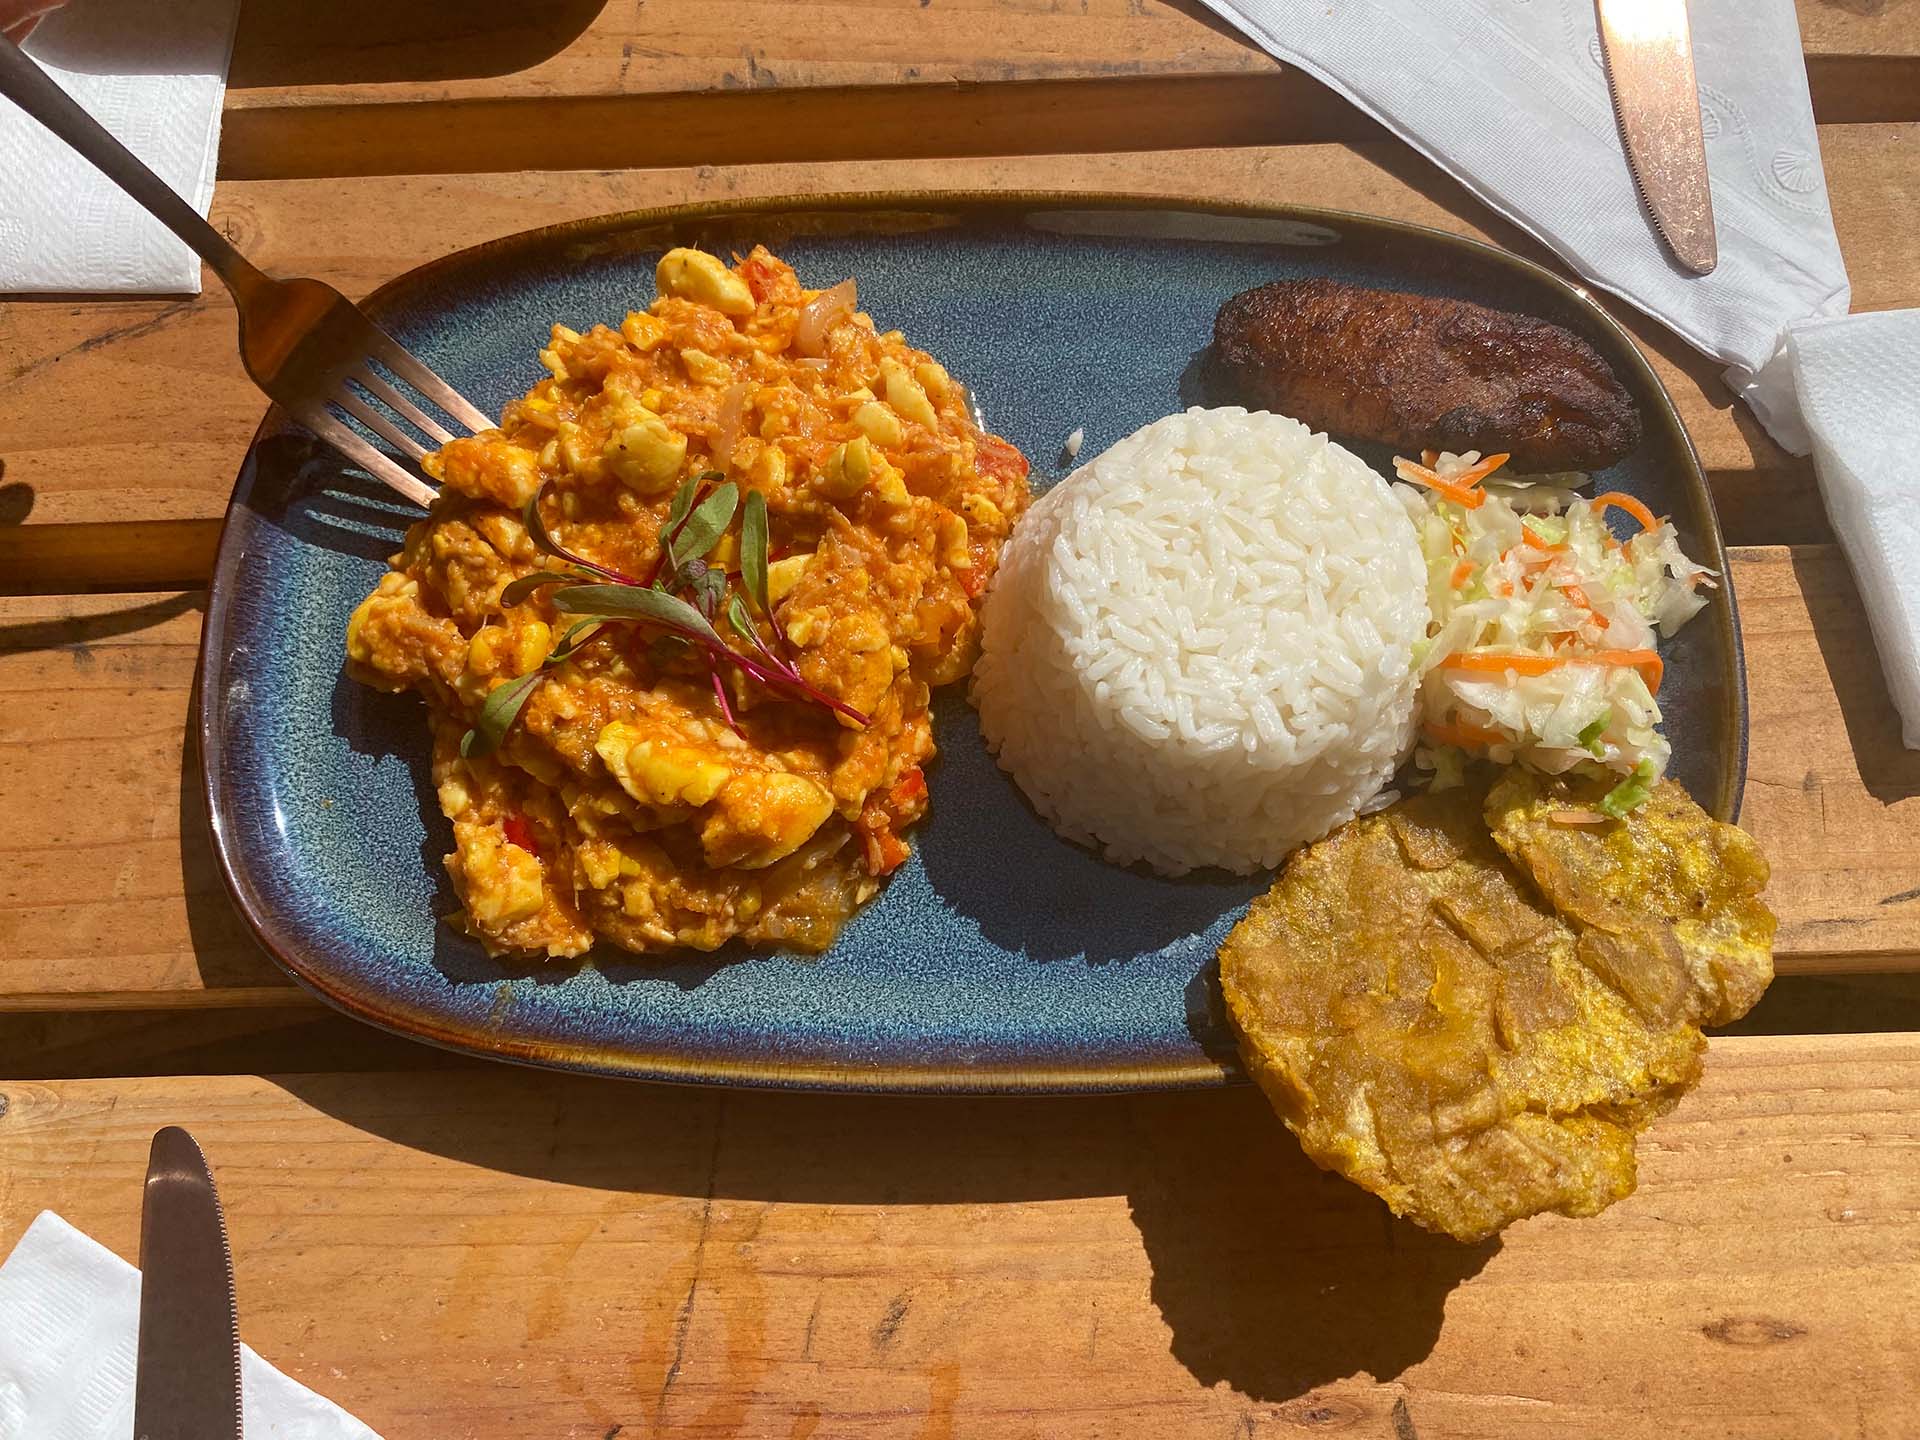 Saltfish and ackee: a scramble of ackee fruit (which looks like scrambled eggs) served on a blue plate with white rice, plantains and pikliz.